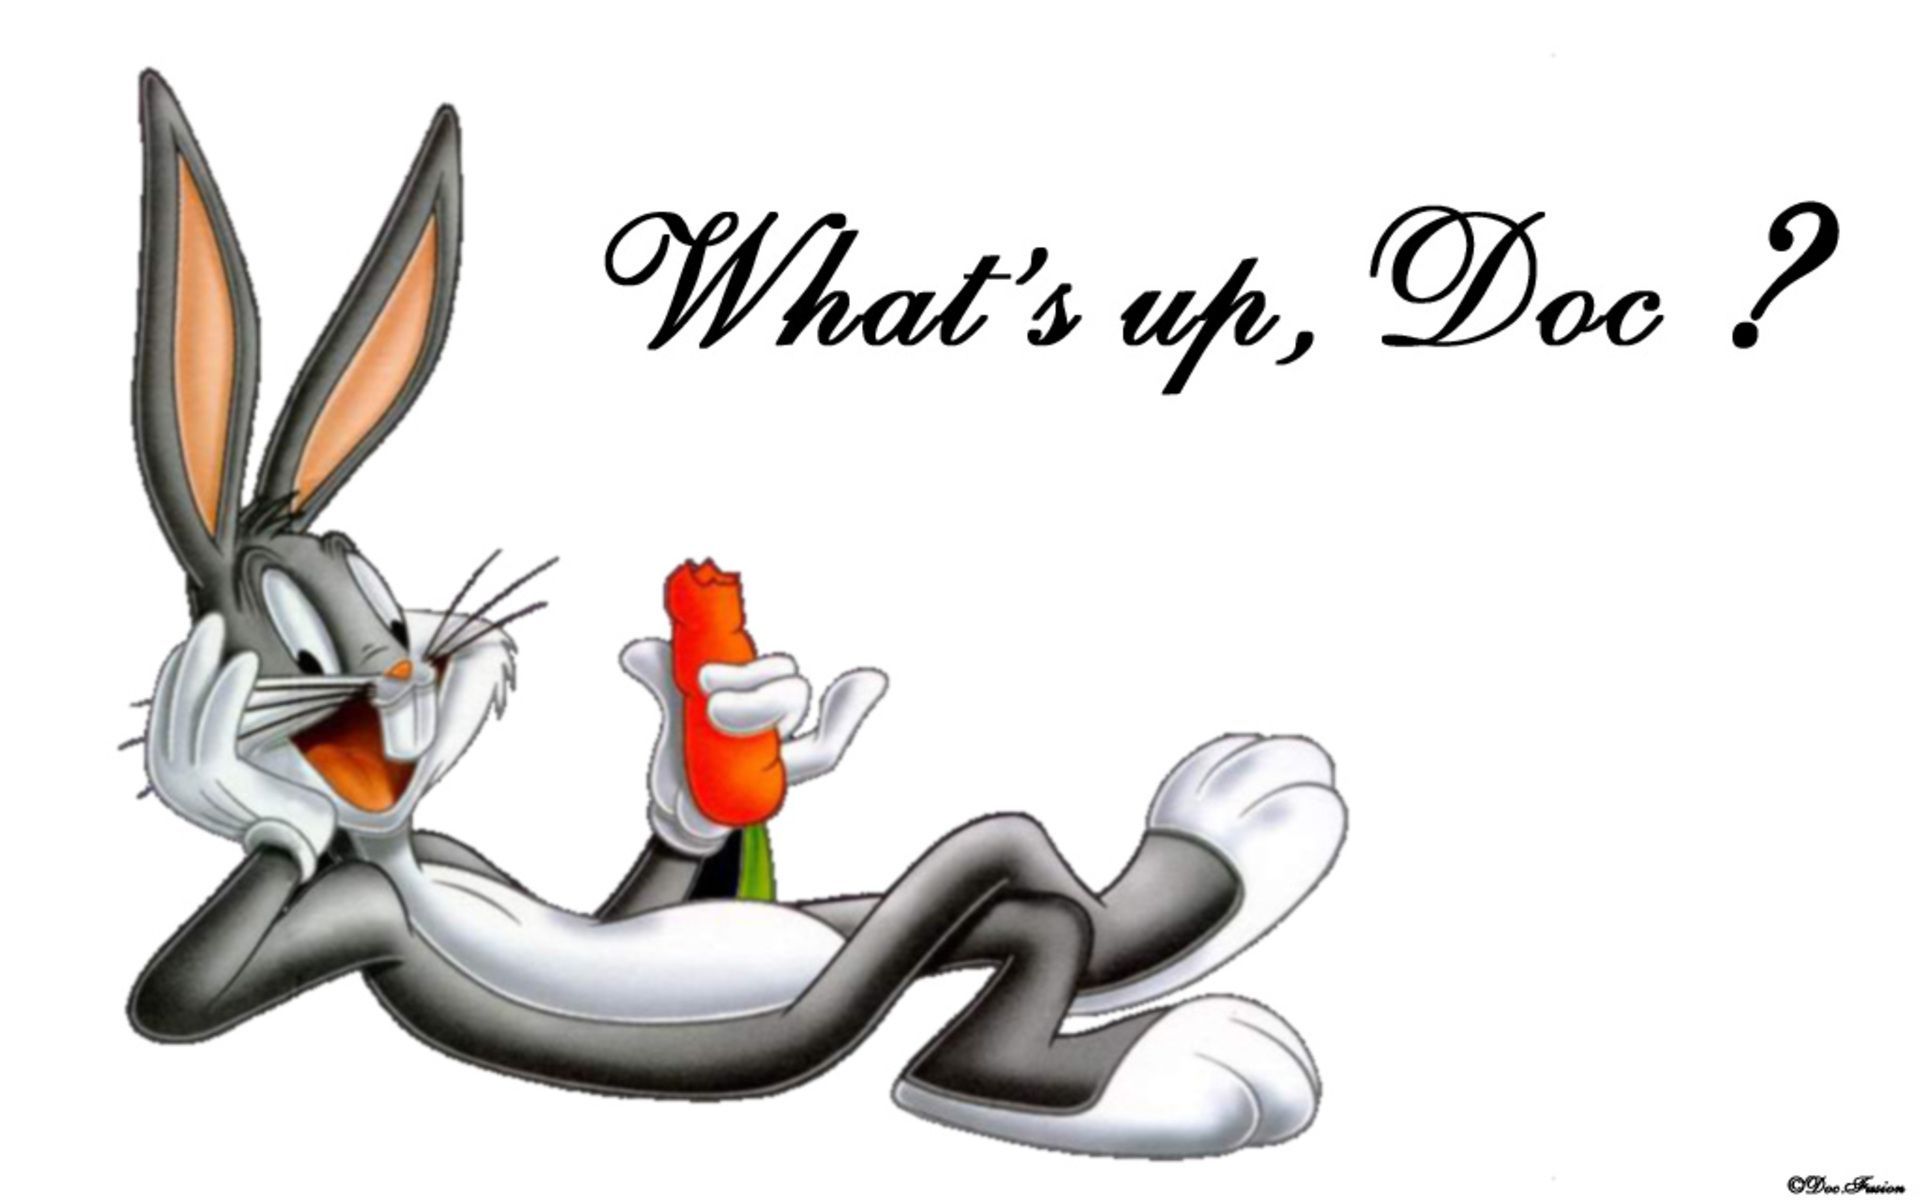 Bugs bunny what's up doc - Bugs Bunny